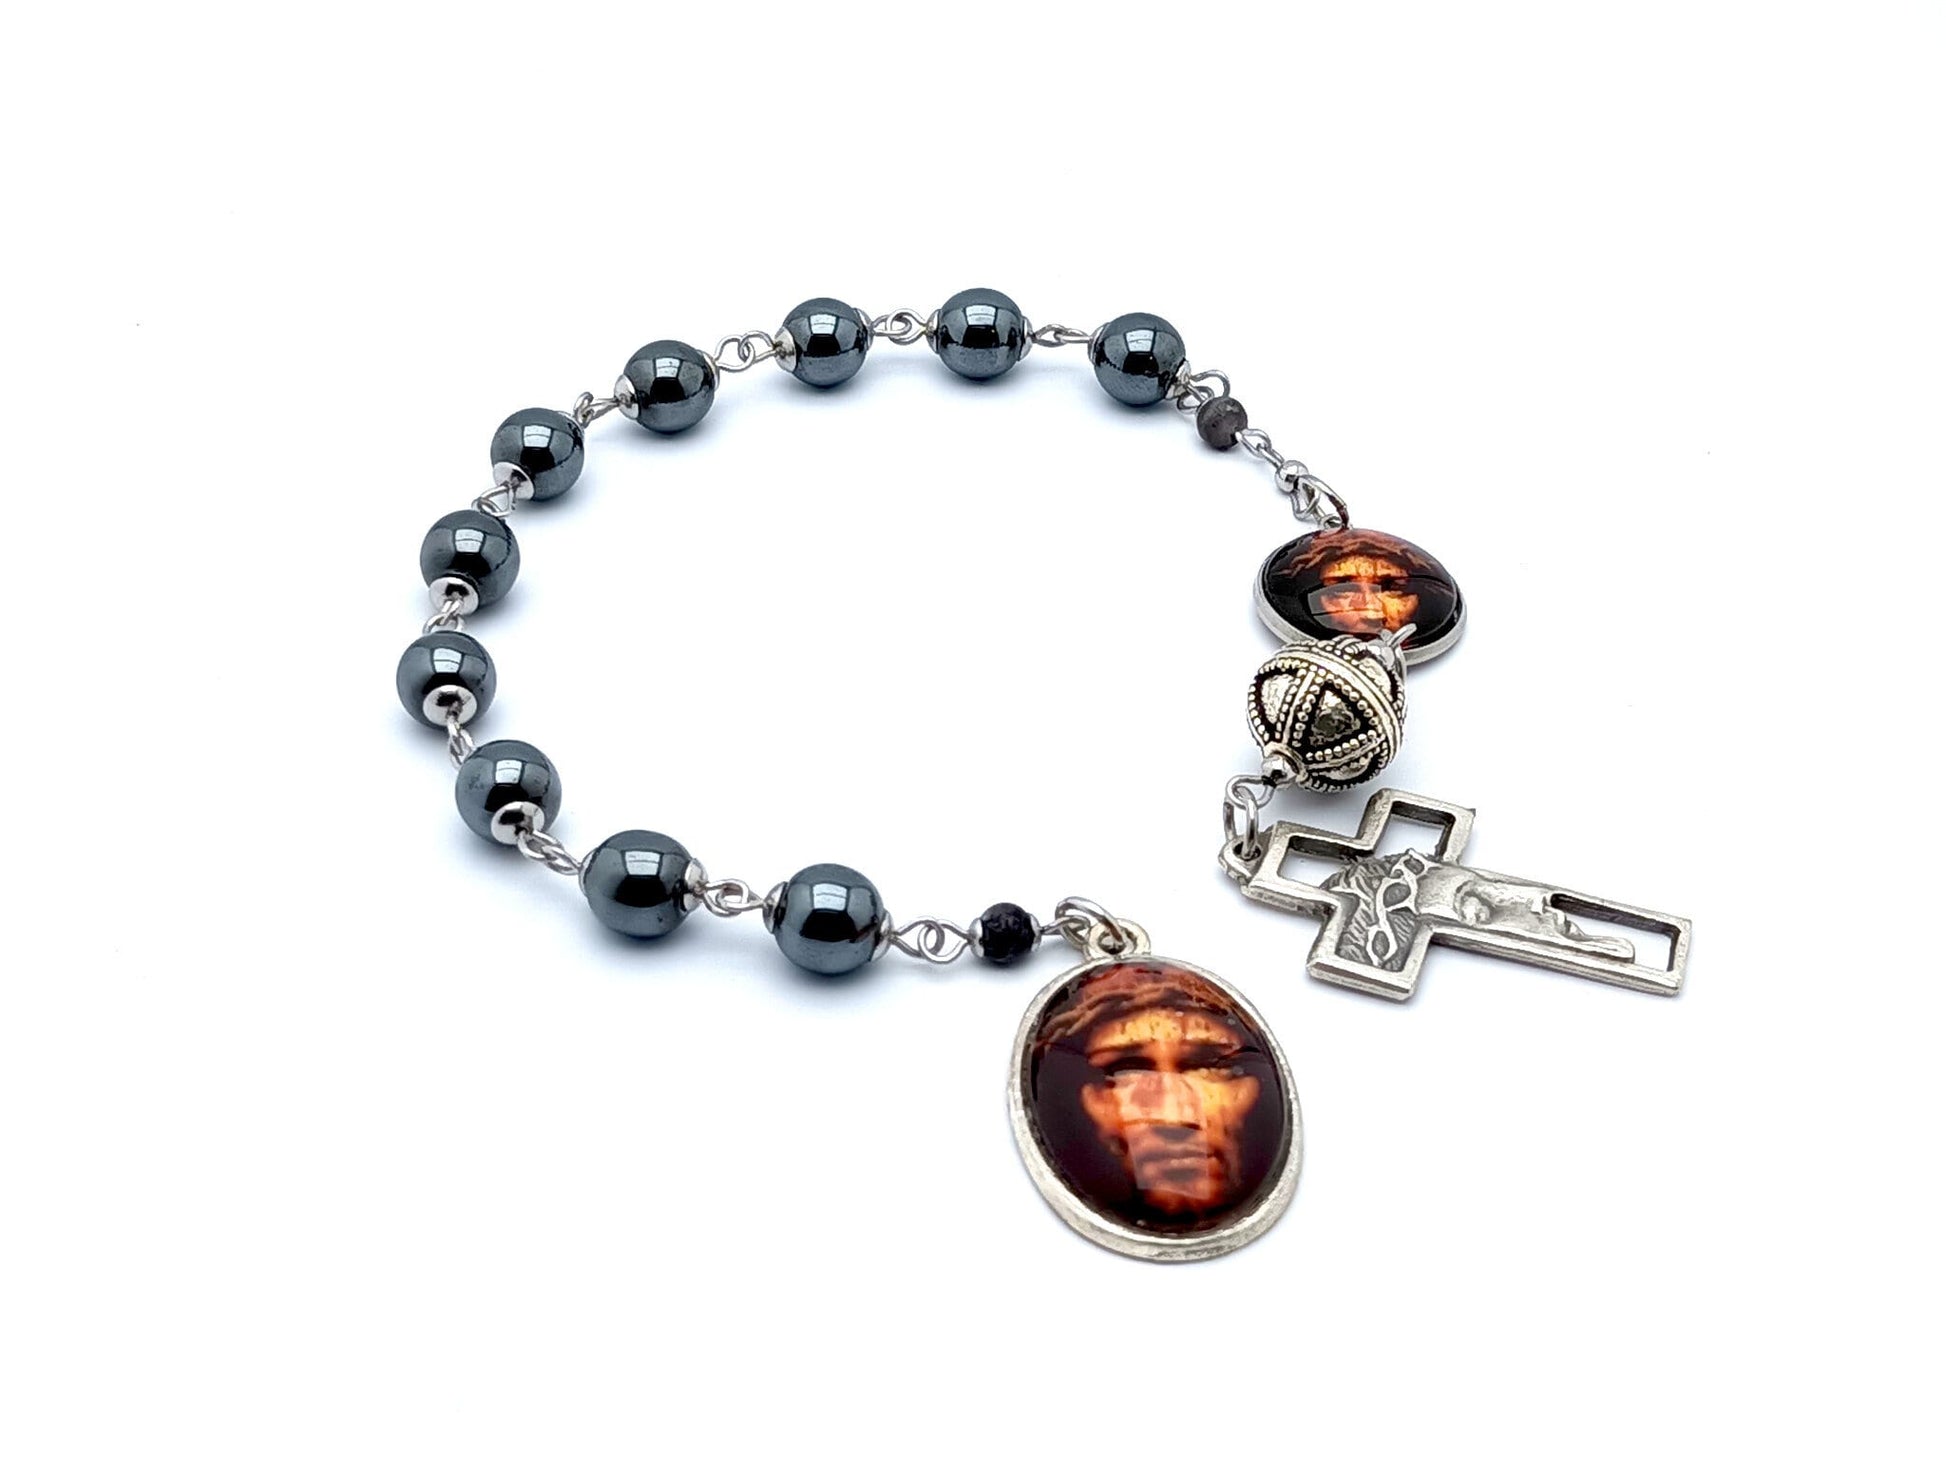 Holy Face of Jesus unique rosary beads hematite gemstone single decade rosary beads with Crowning with Thorns cross.